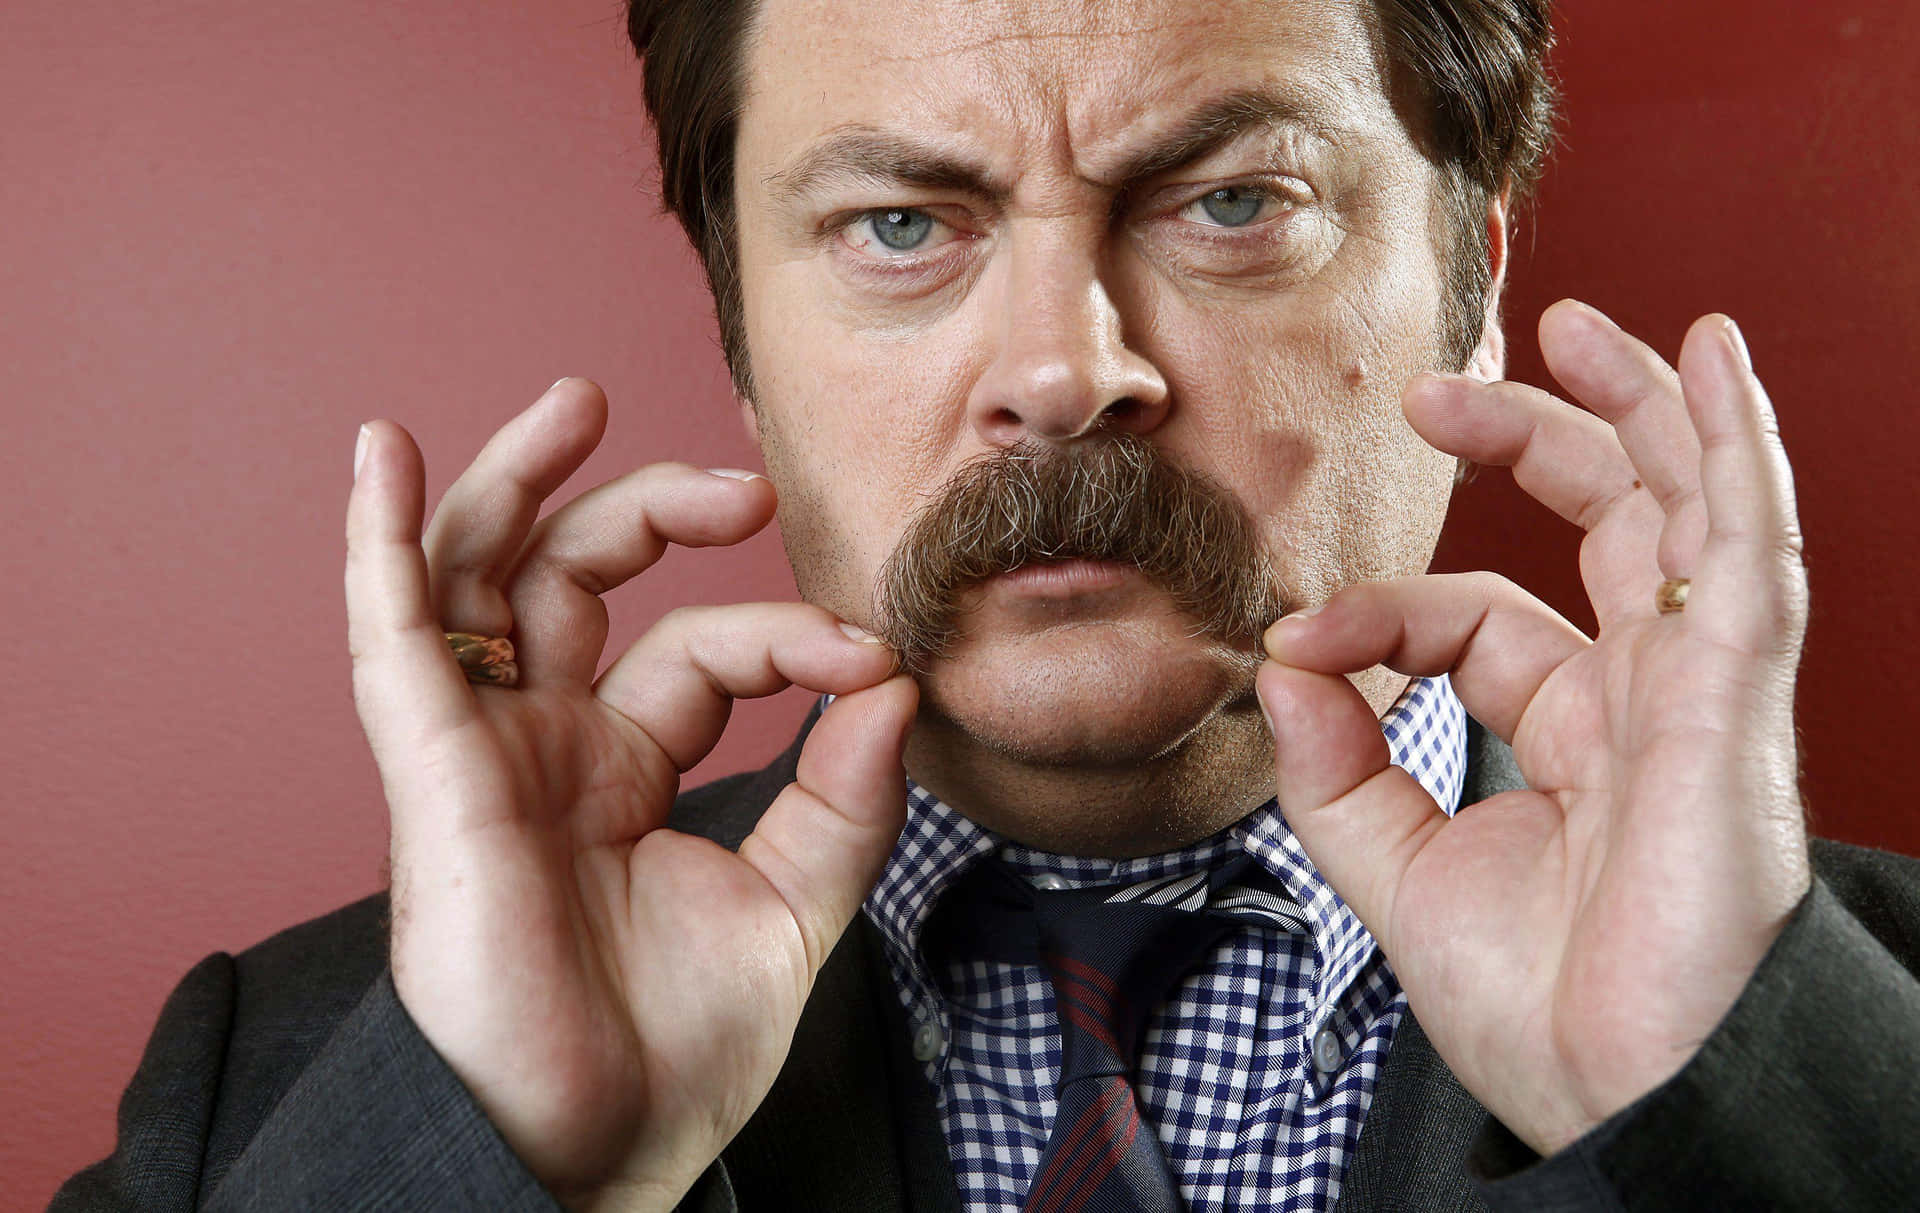 Nick Offerman, America's Beloved Actor And Comedian Background